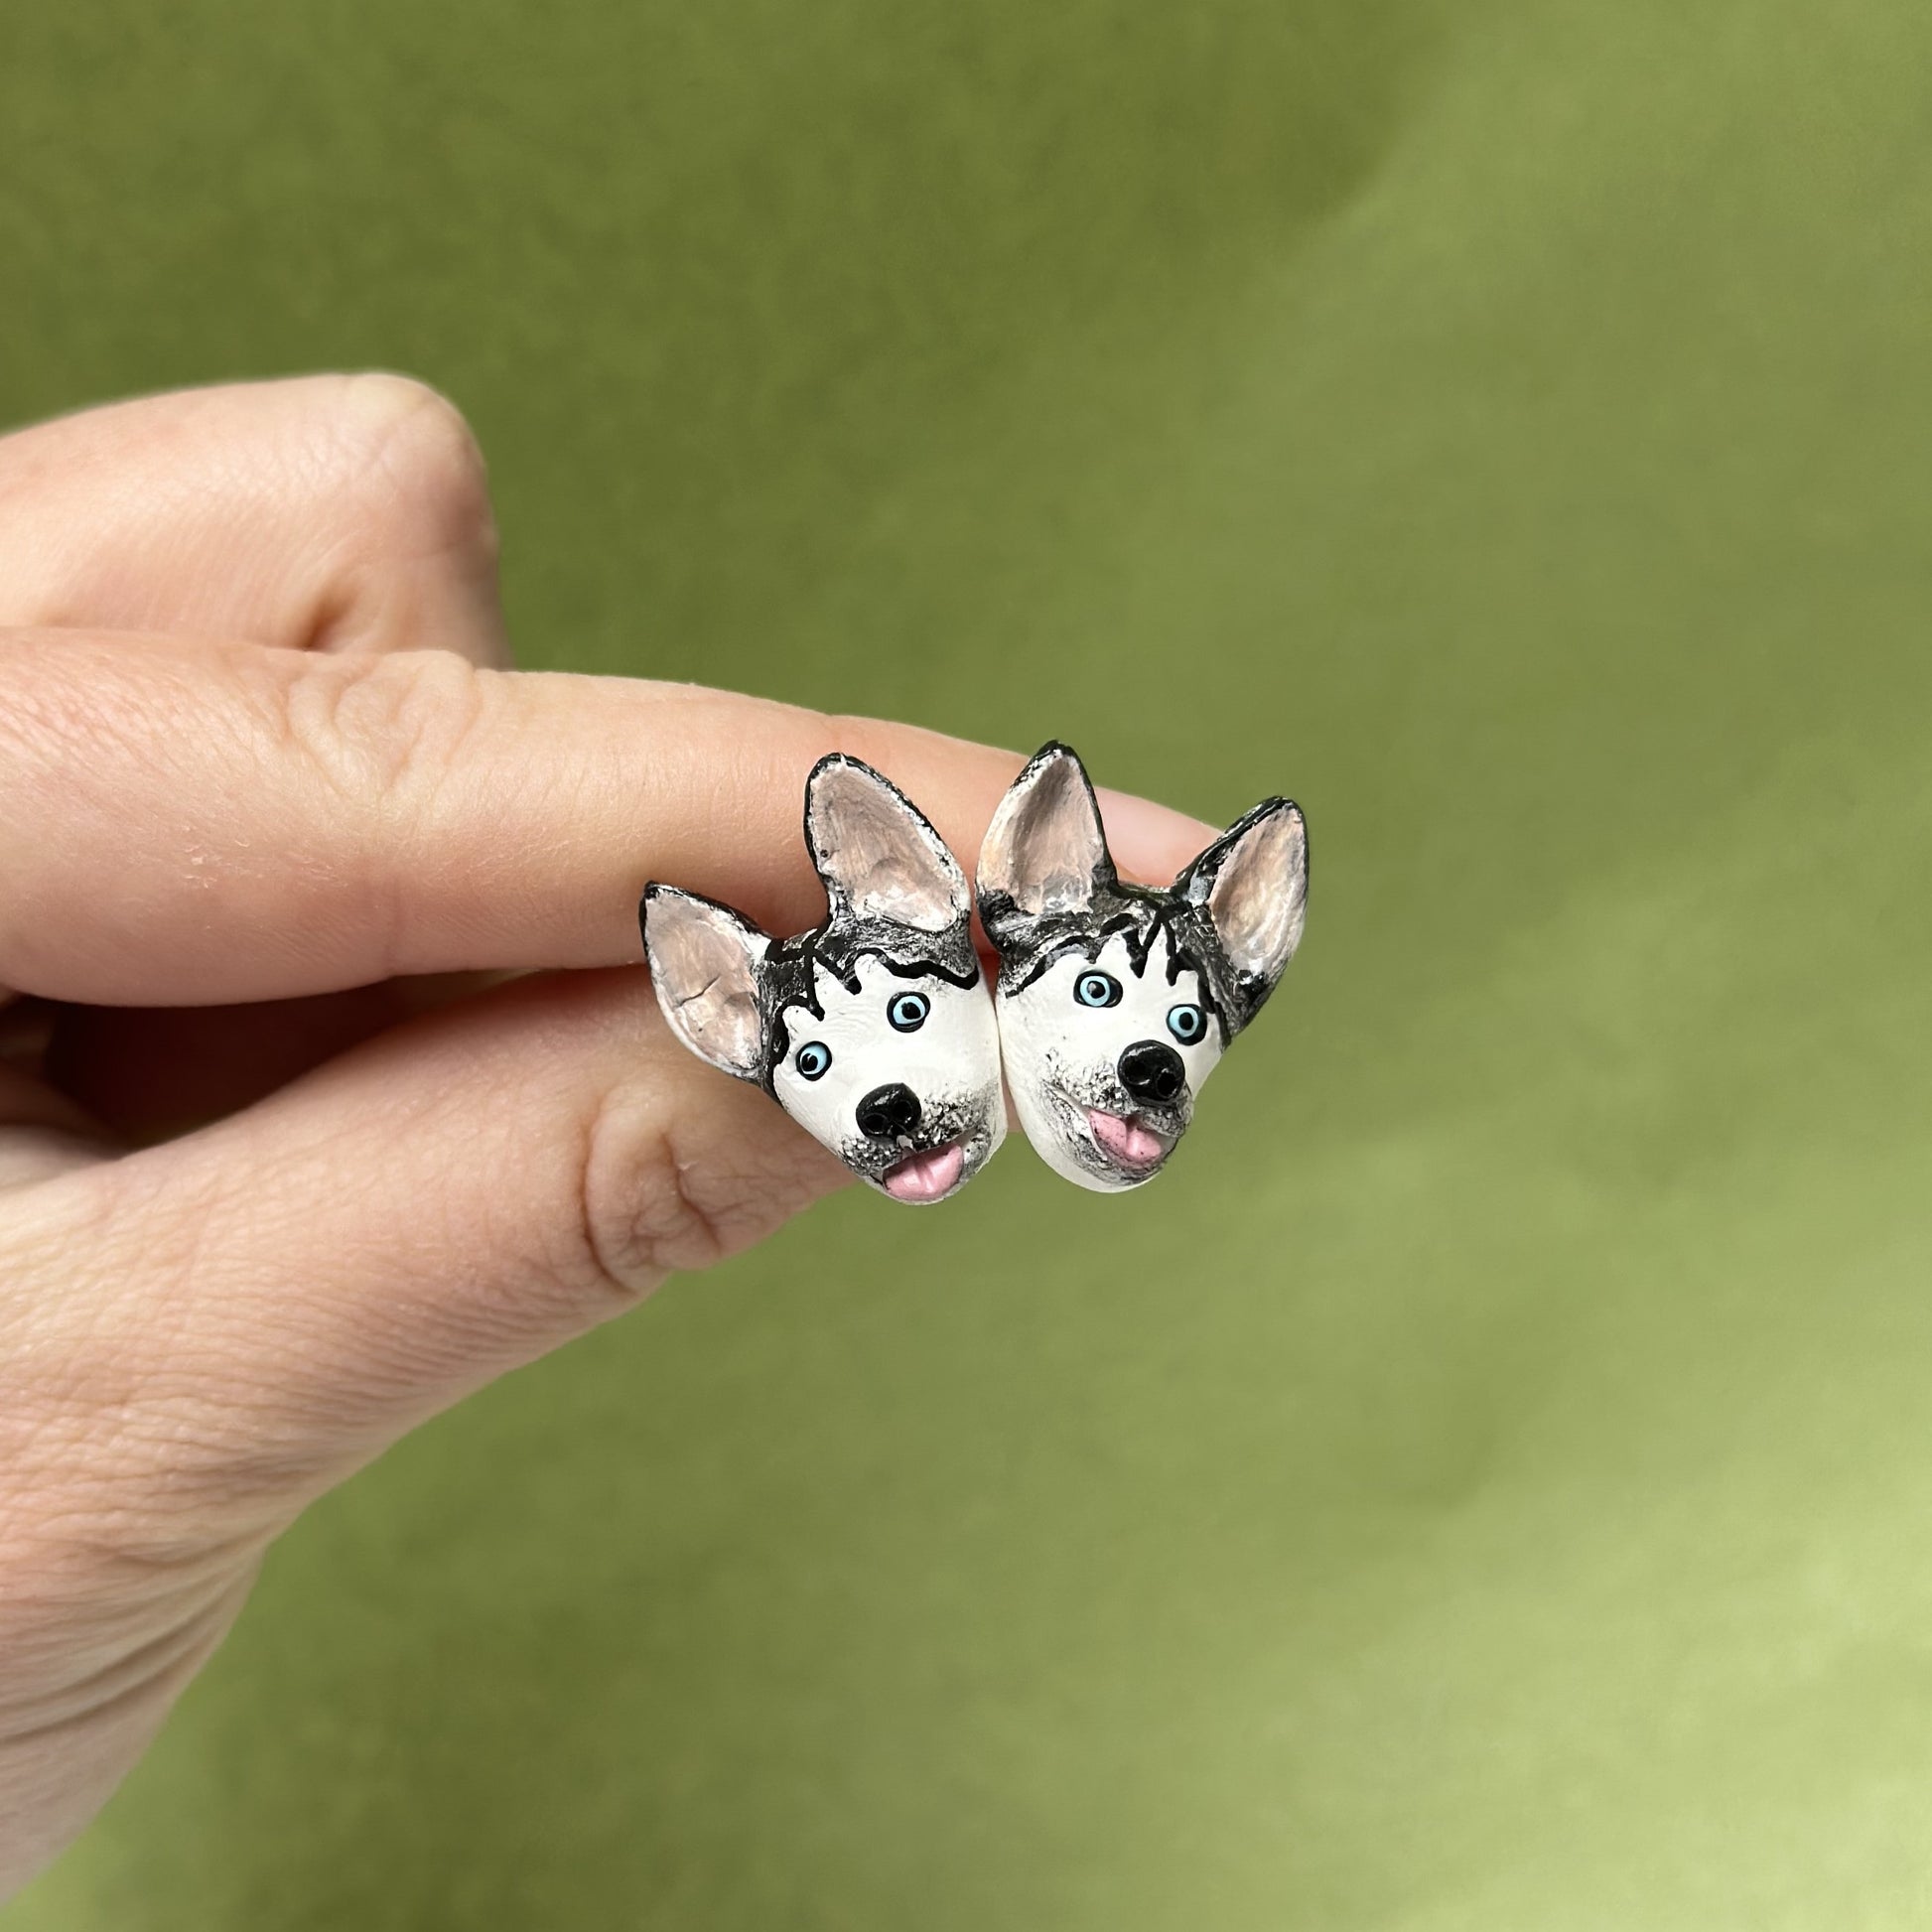 Handmade husky stud earrings by Pawfect Love, positioned in front of green background